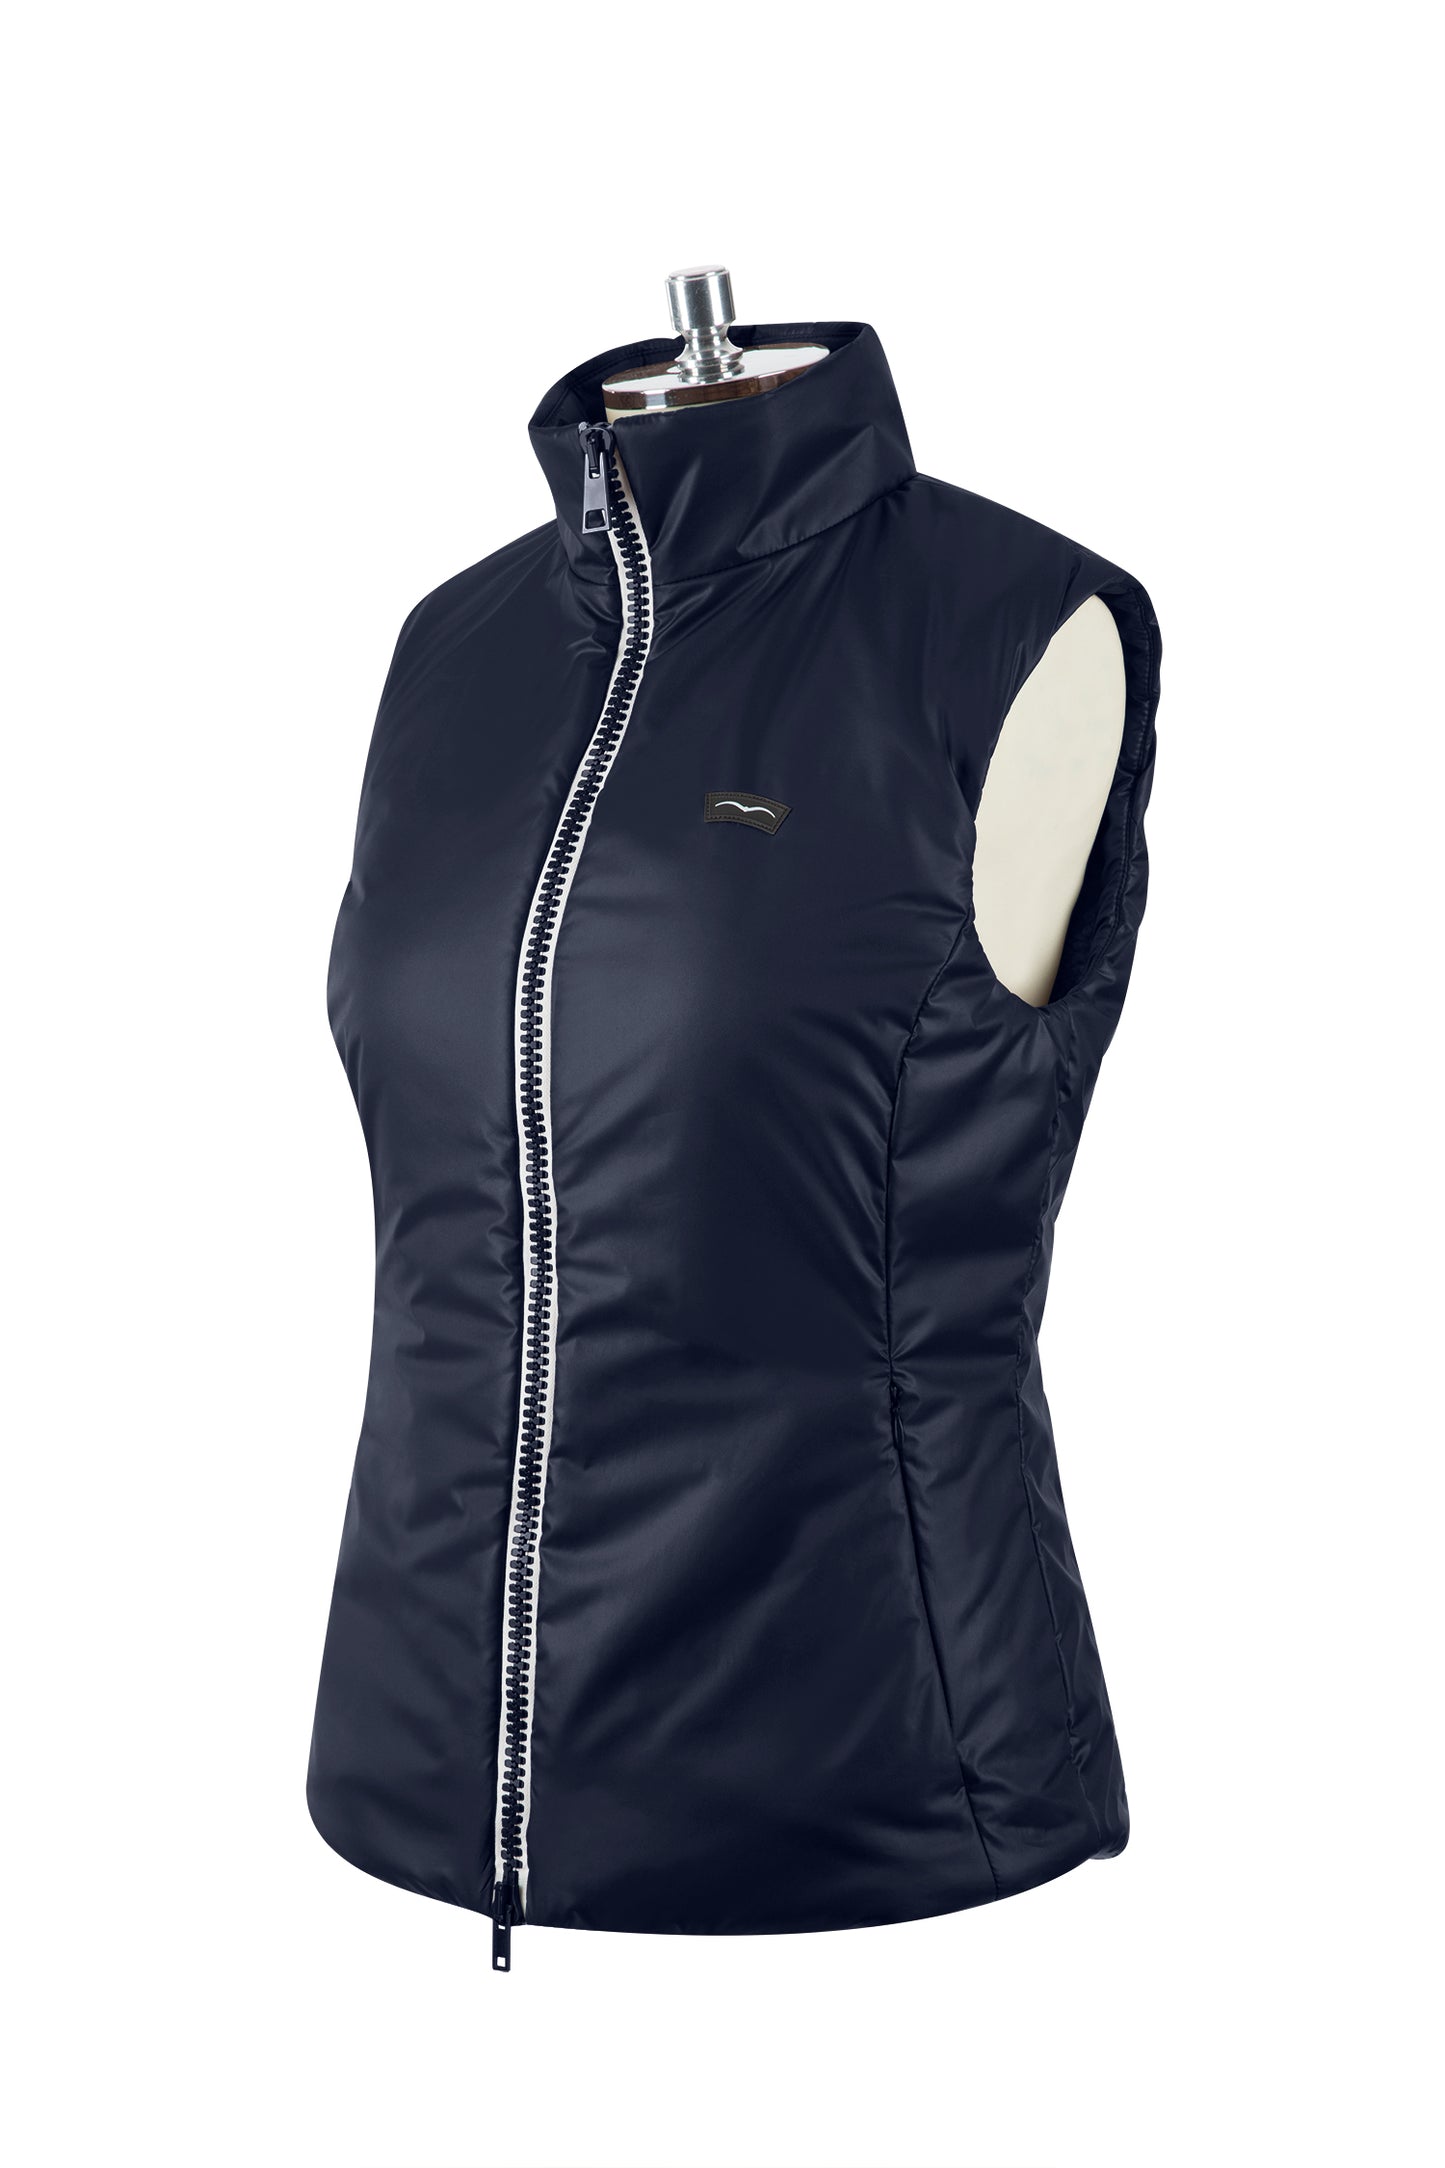 Animo bodywarmer ladies Lacey navy